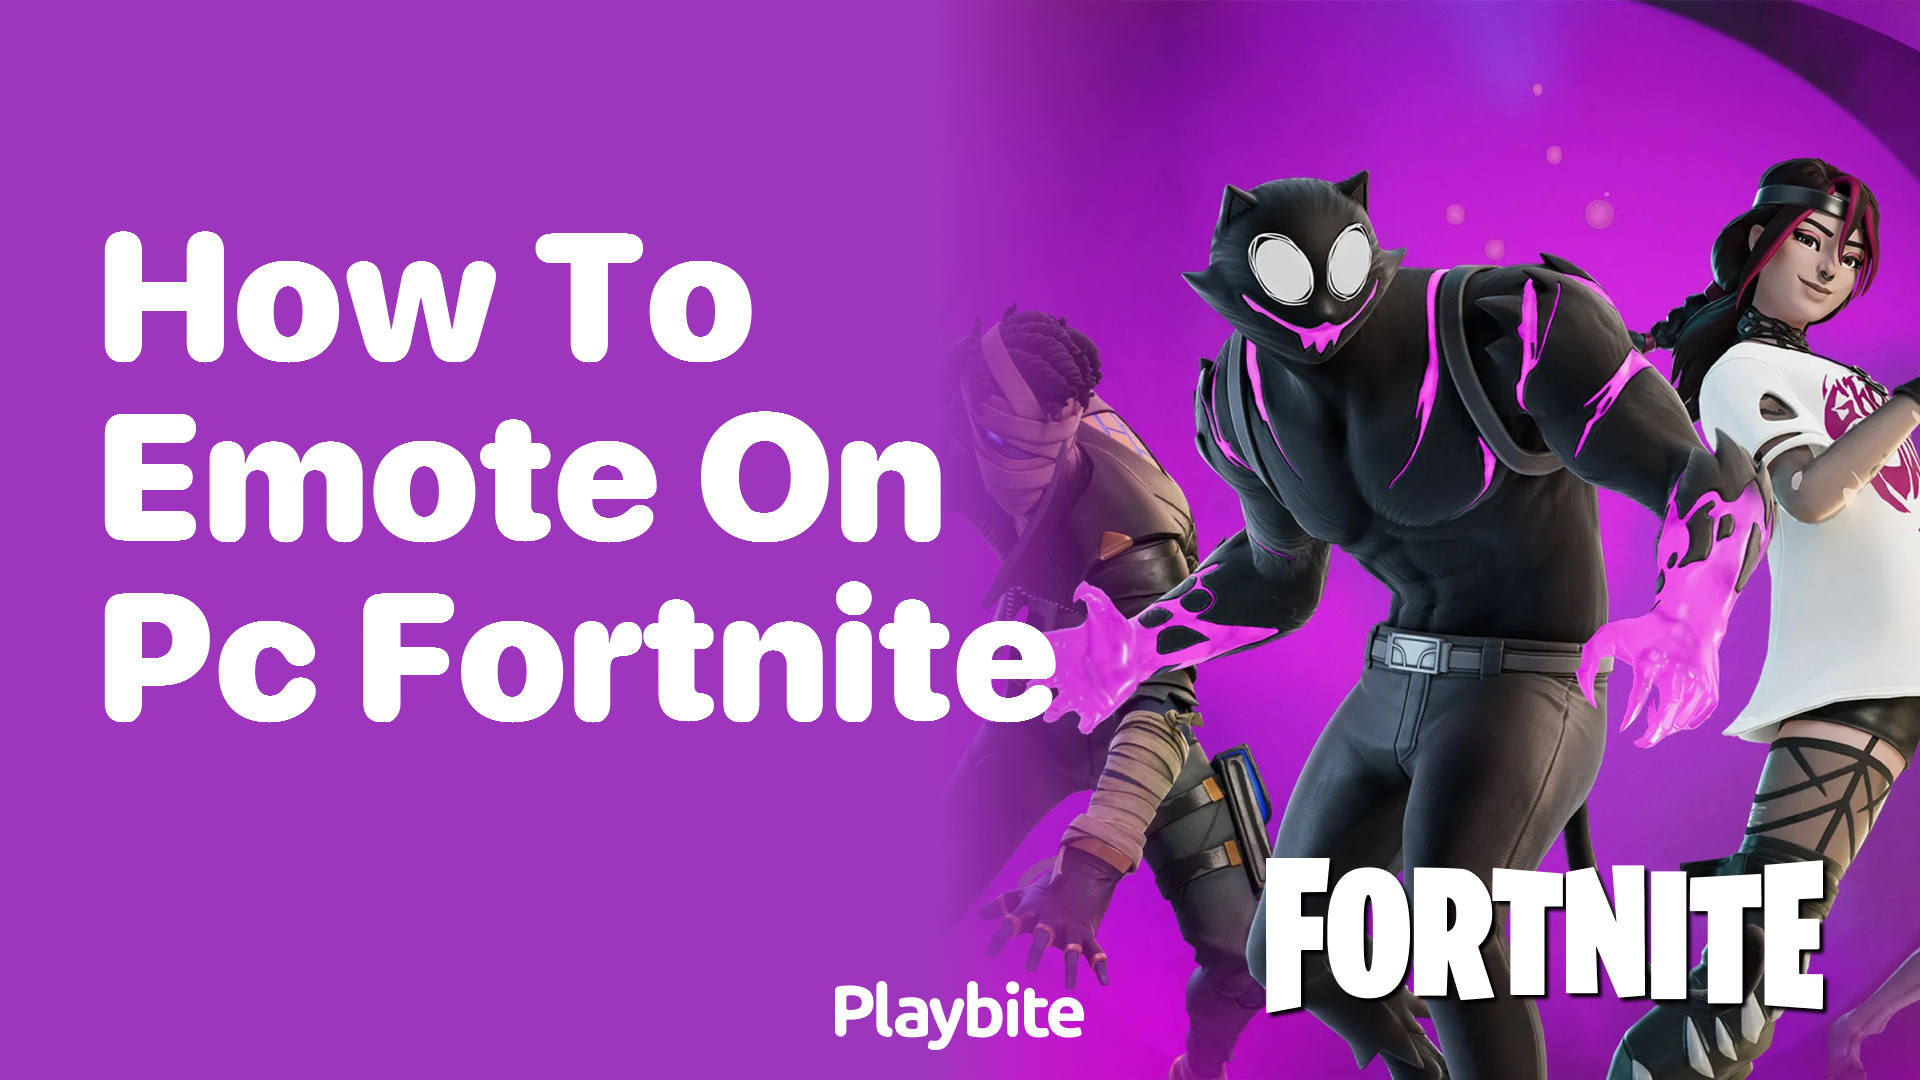 How to Emote on PC in Fortnite: A Quick Guide